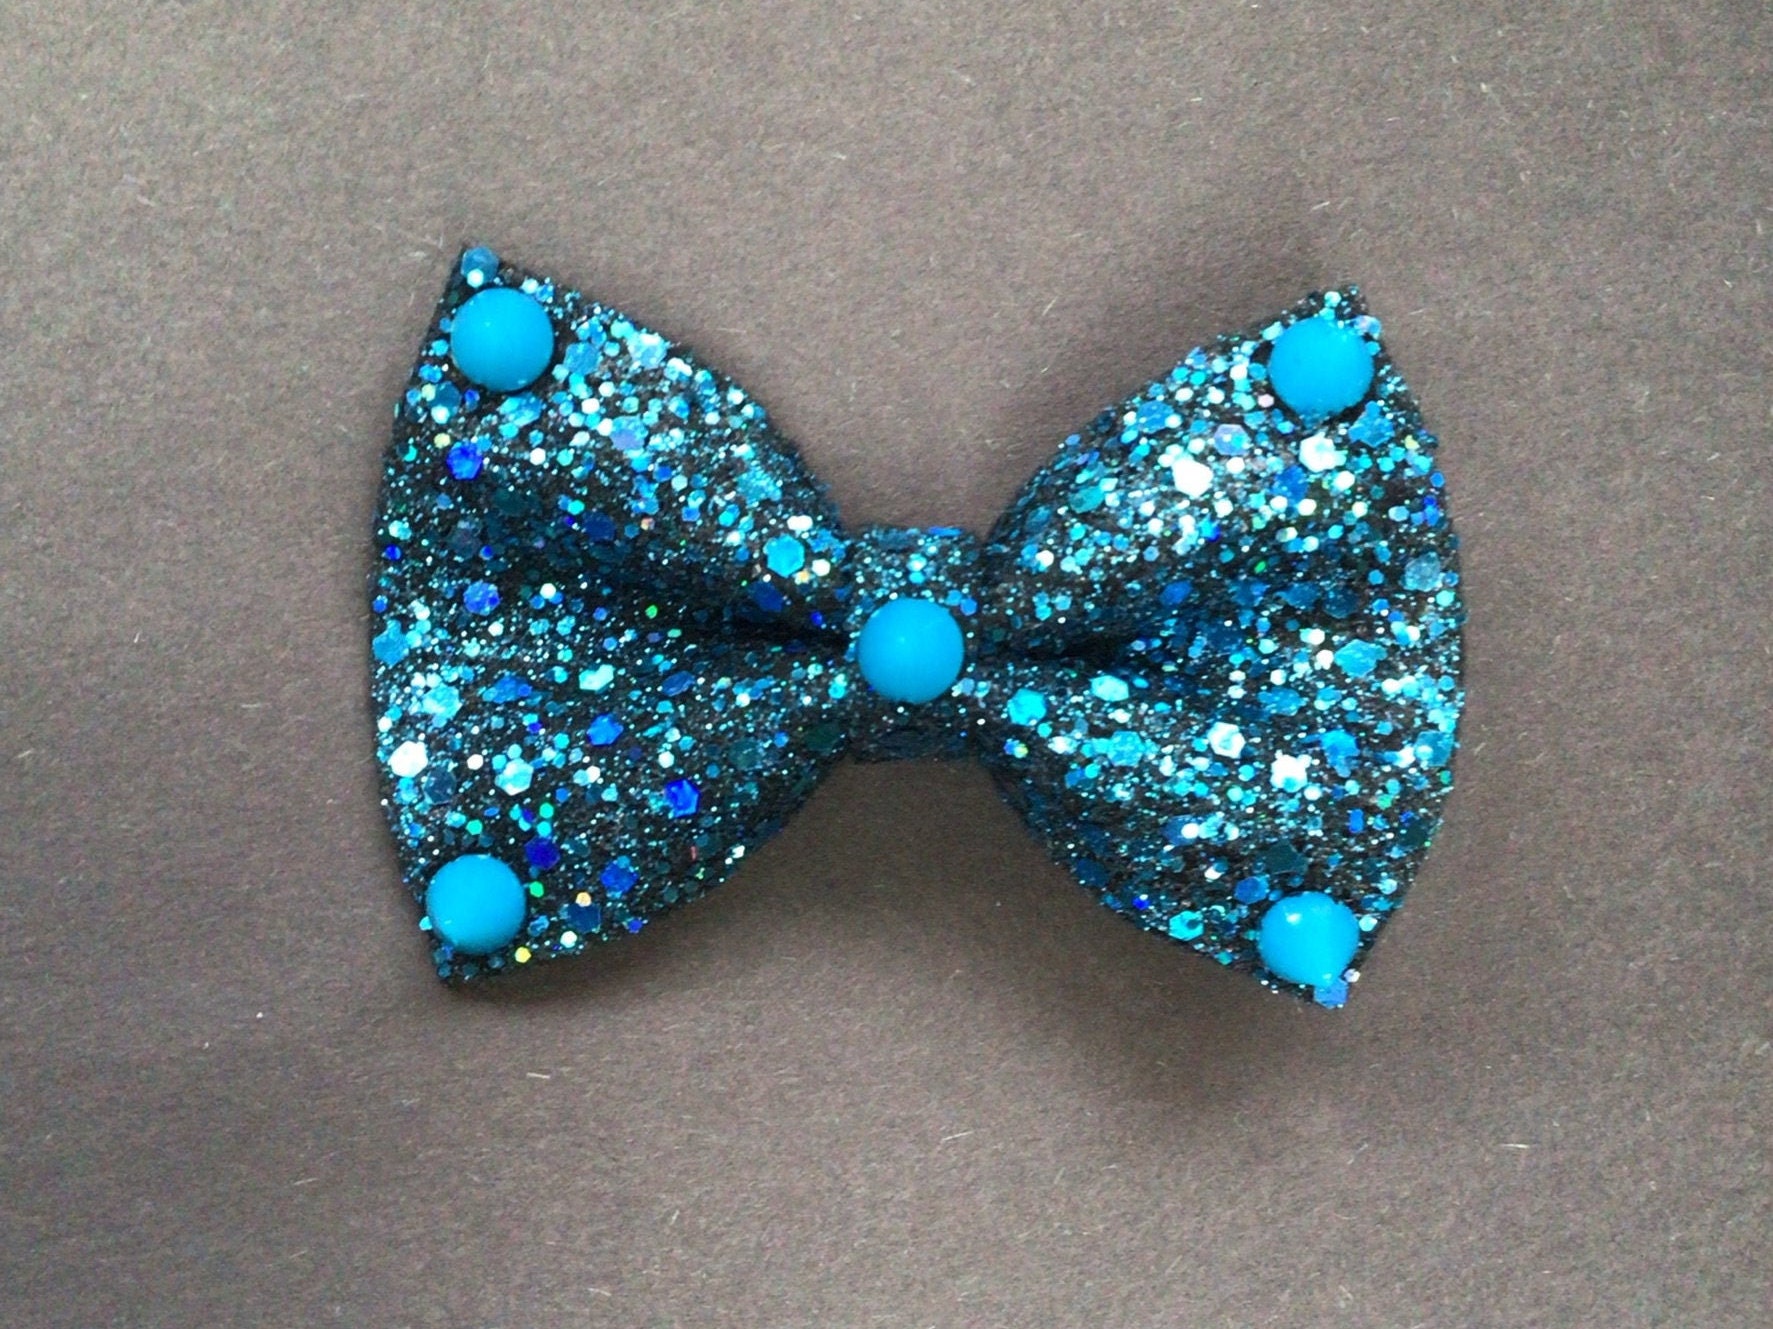 9. 10 Short Neon Blue Hair Accessories to Complete Your Look - wide 2